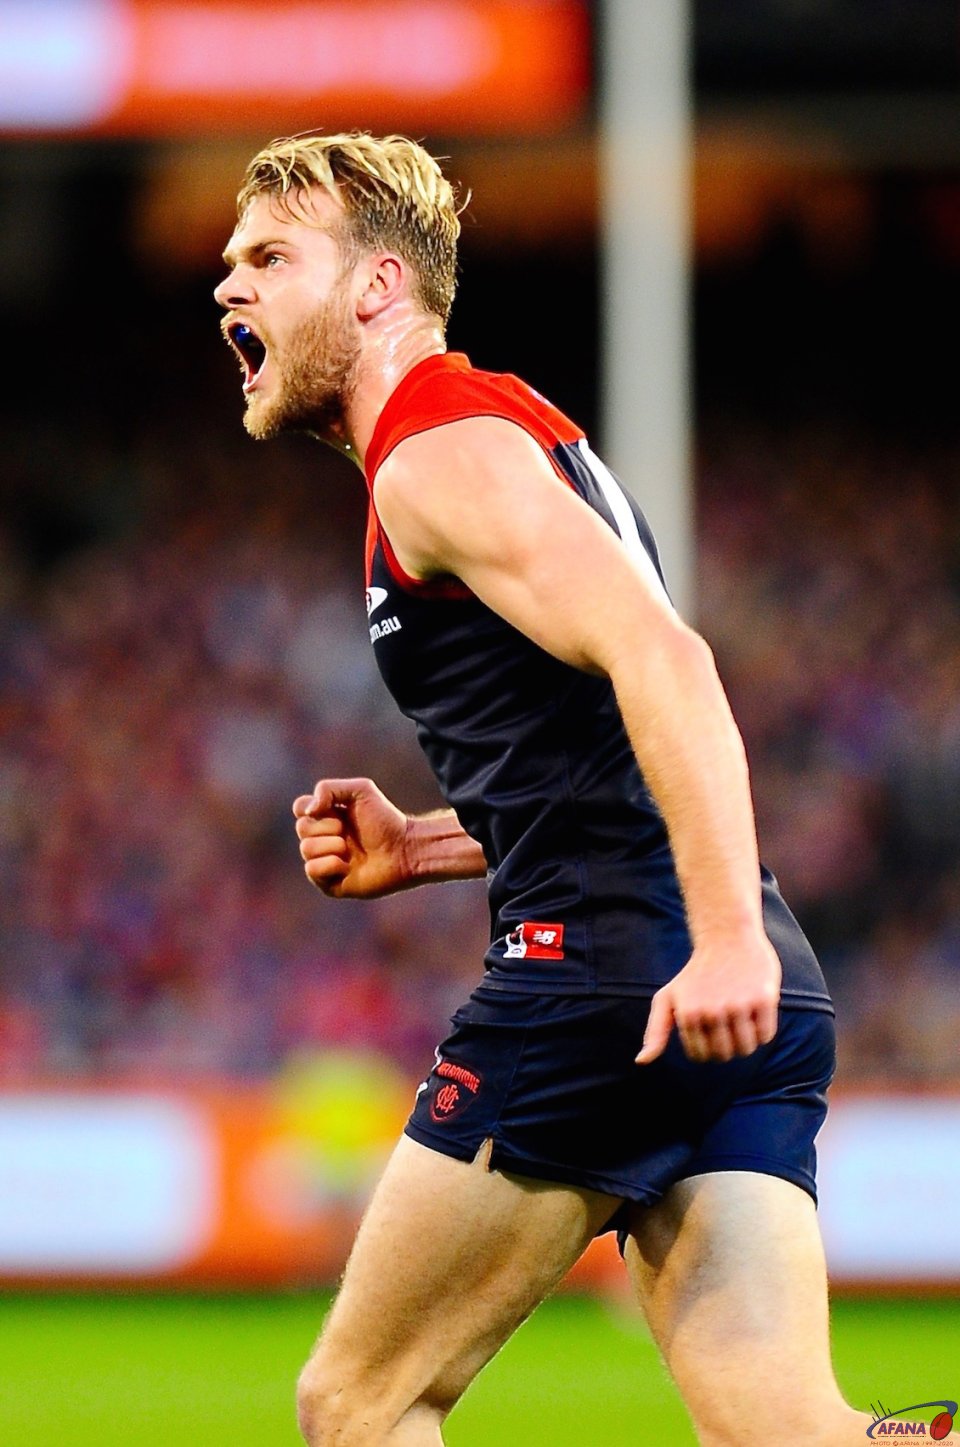 Jubulation on Jack Watts face after scoring another goal